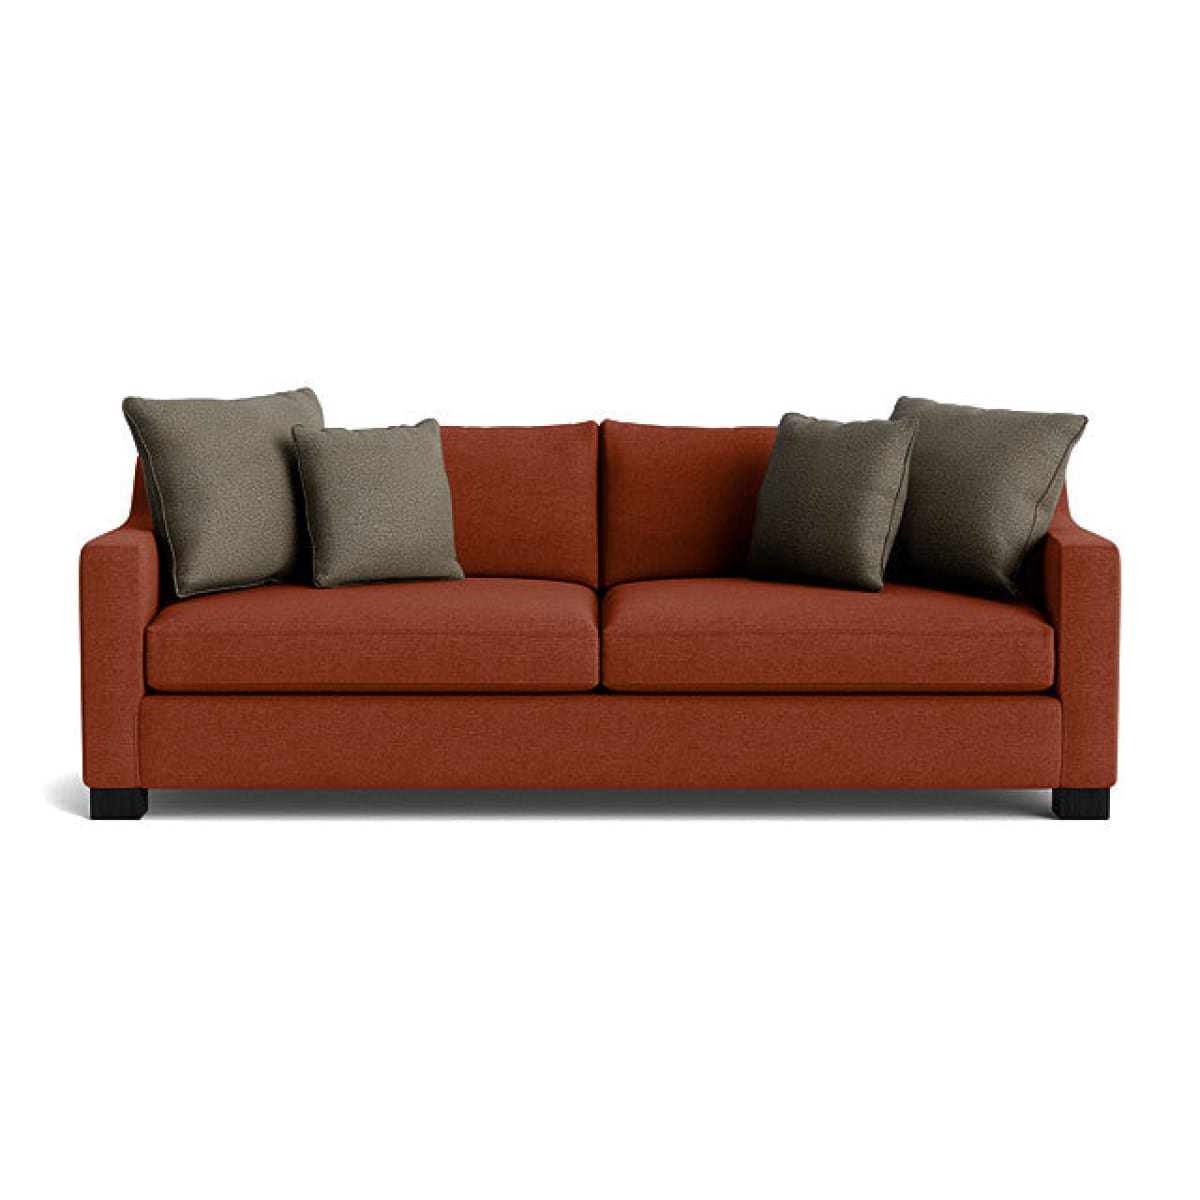 Ewing Sofa - Sectional - Entice Spice